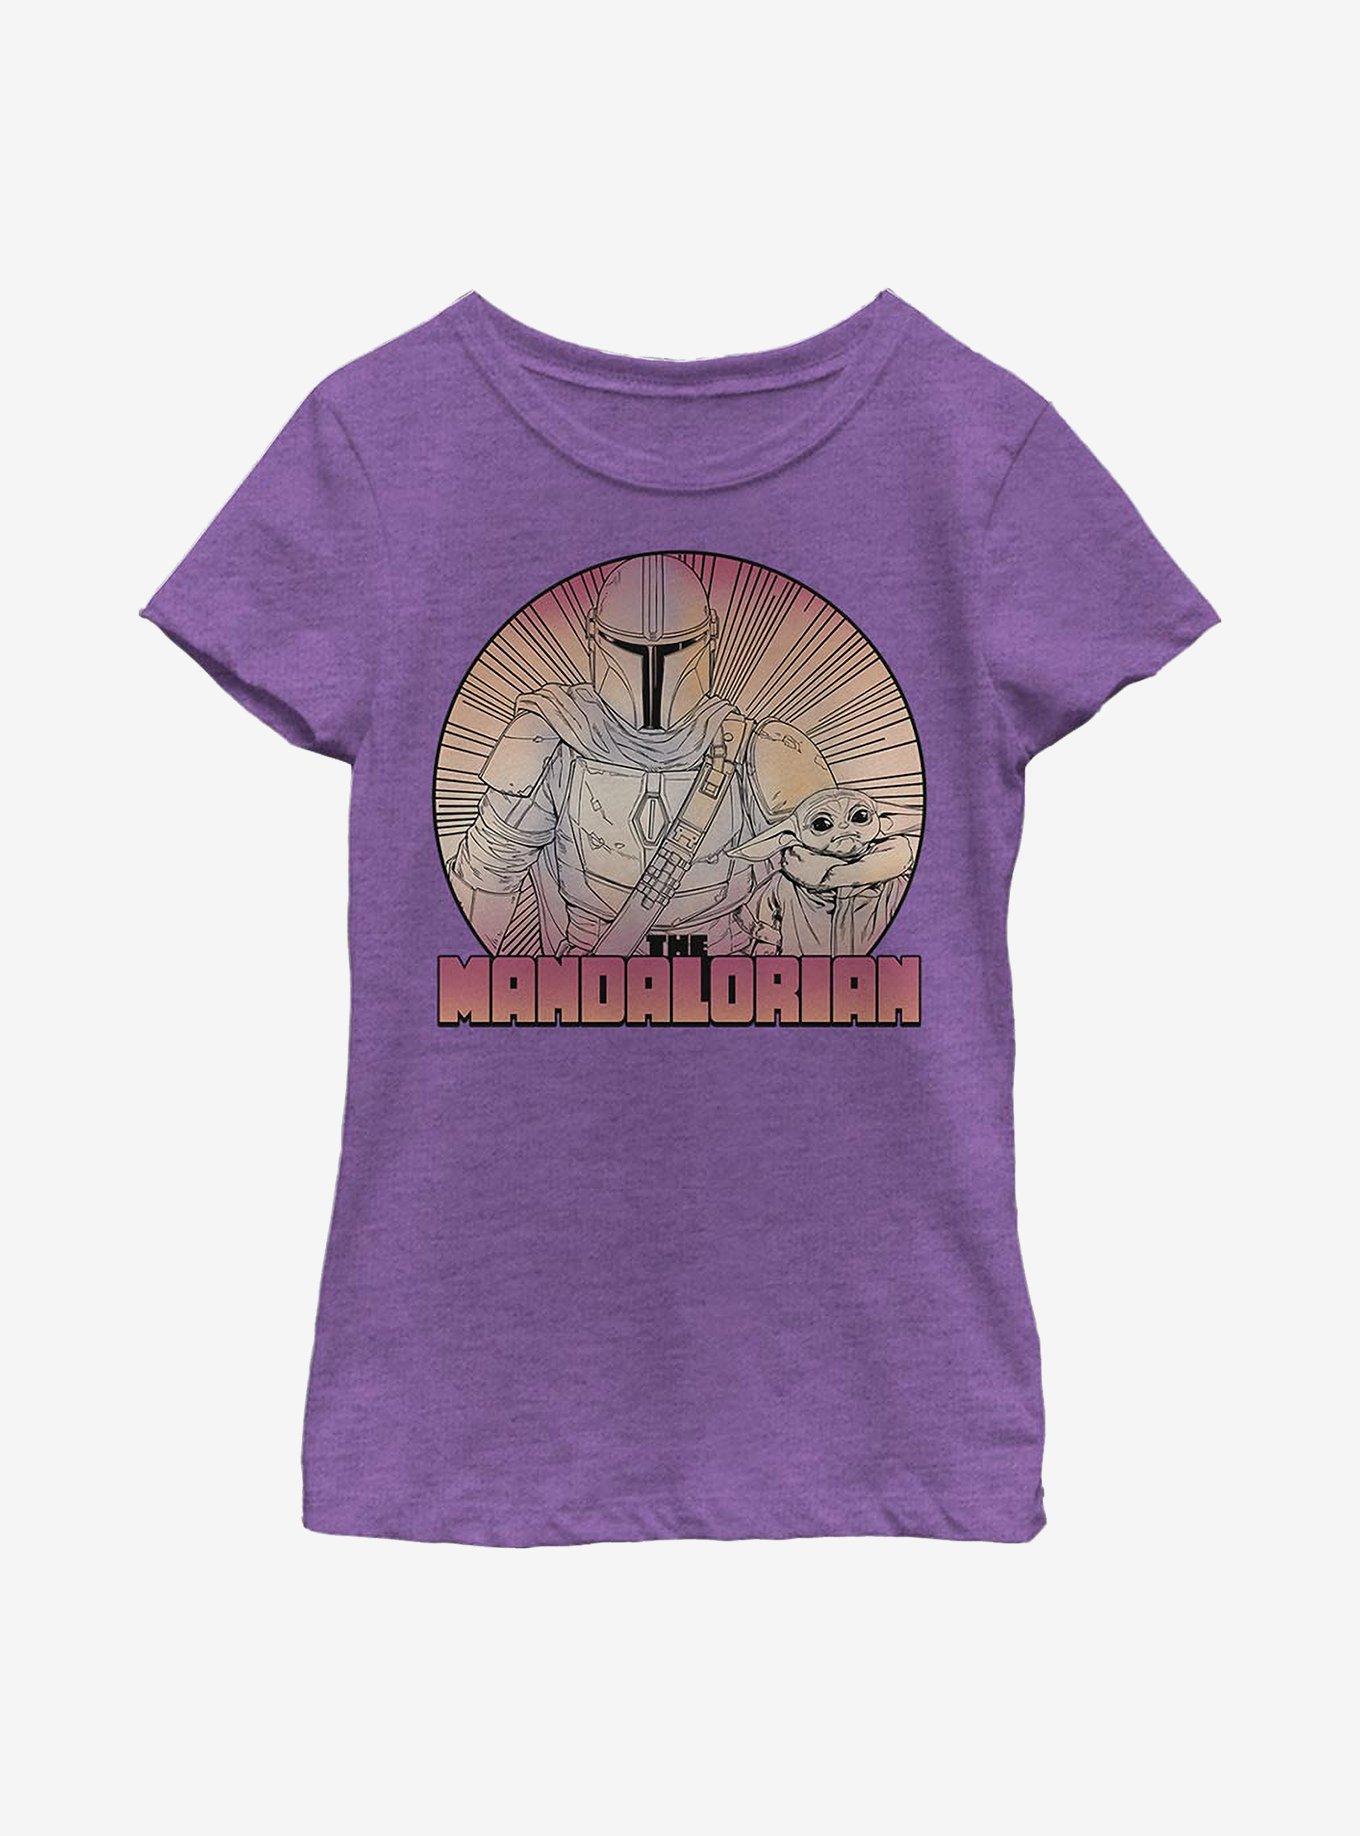 Star Wars The Mandalorian The Child Inside The Lines Youth Girls T-Shirt, PURPLE BERRY, hi-res